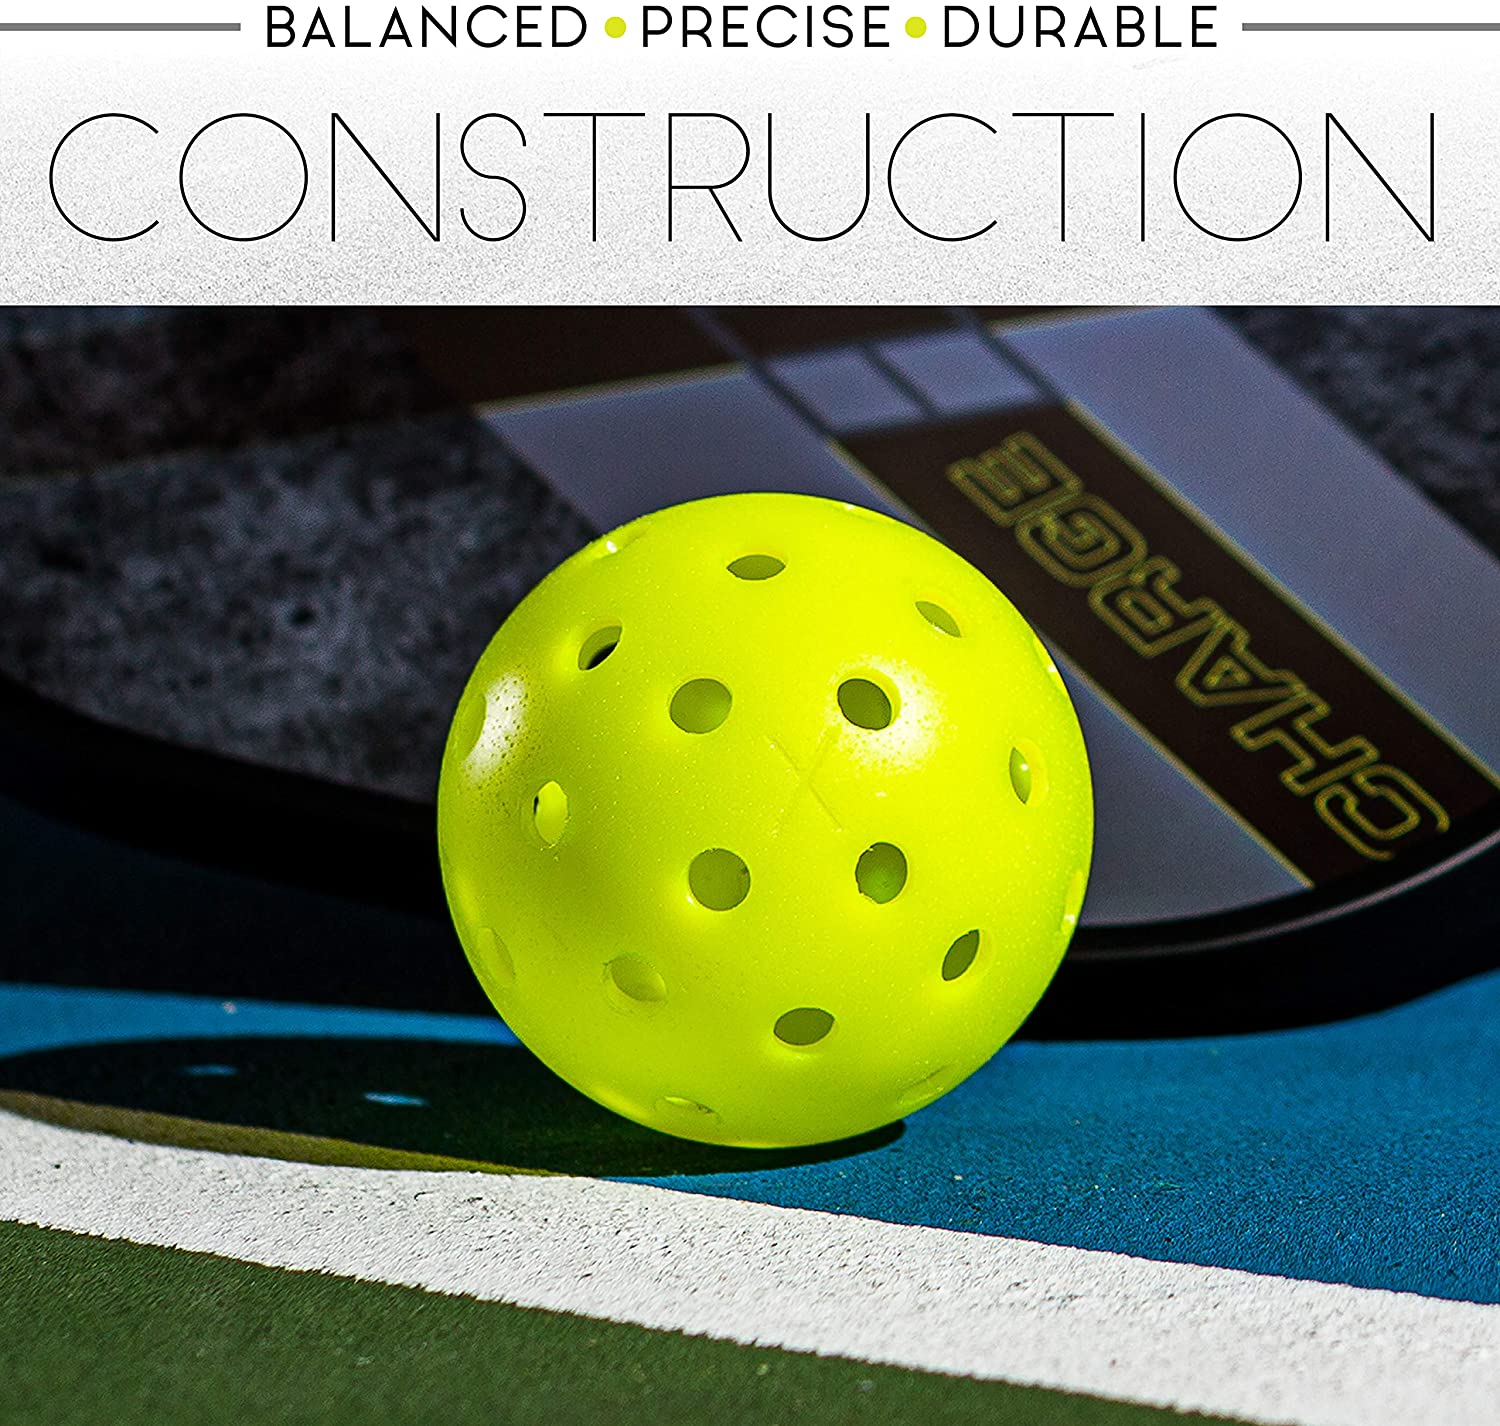 A Franklin X-40 Outdoor Pickleball Ball on a tennis court with the words balanced precision durable construction.